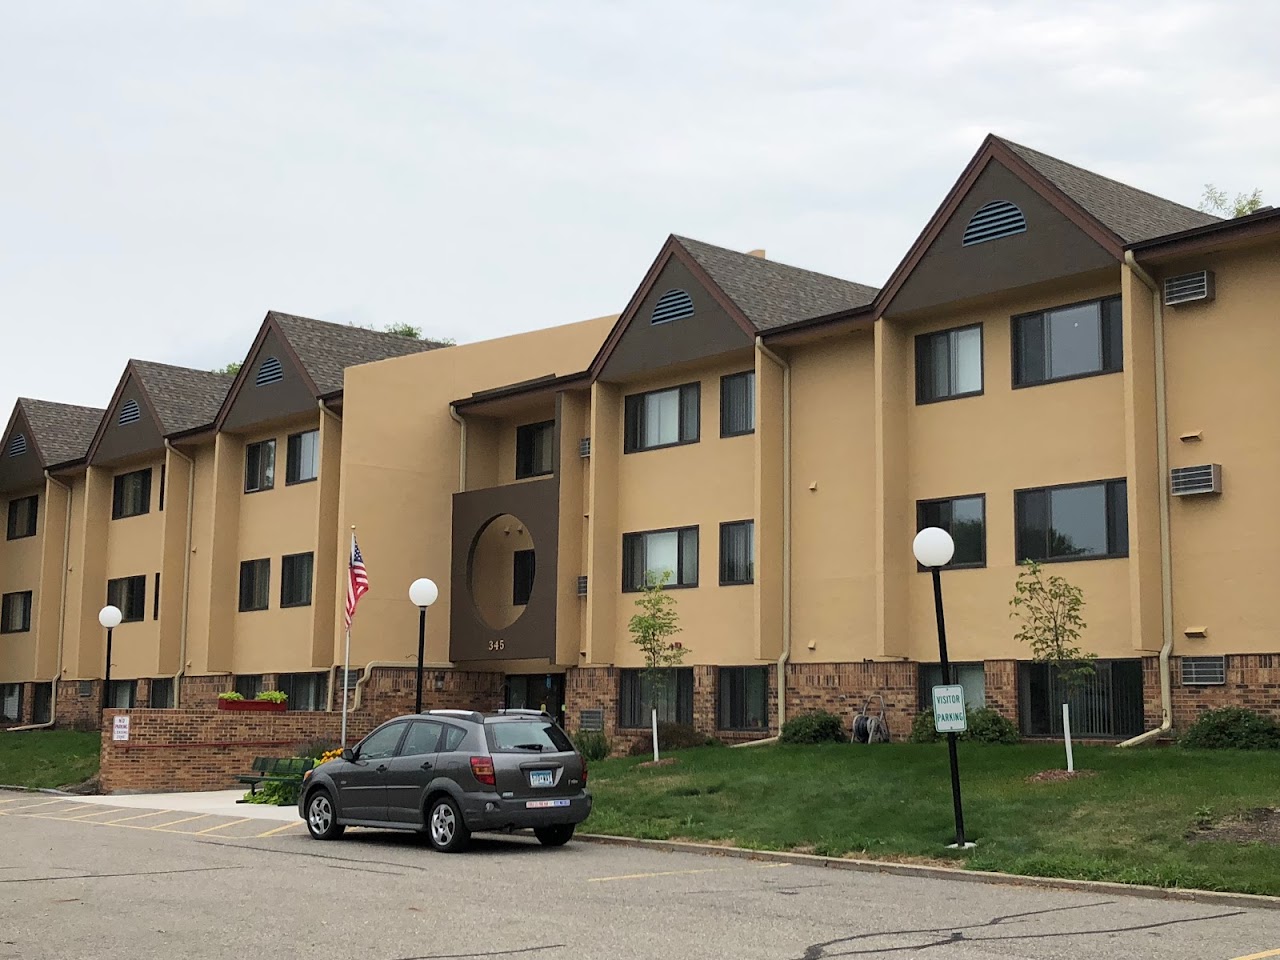 Photo of CEDARDALE PLACE A/K/A CEDARDALE SOUTH. Affordable housing located at MULTIPLE BUILDING ADDRESSES OWATONNA, MN 55060